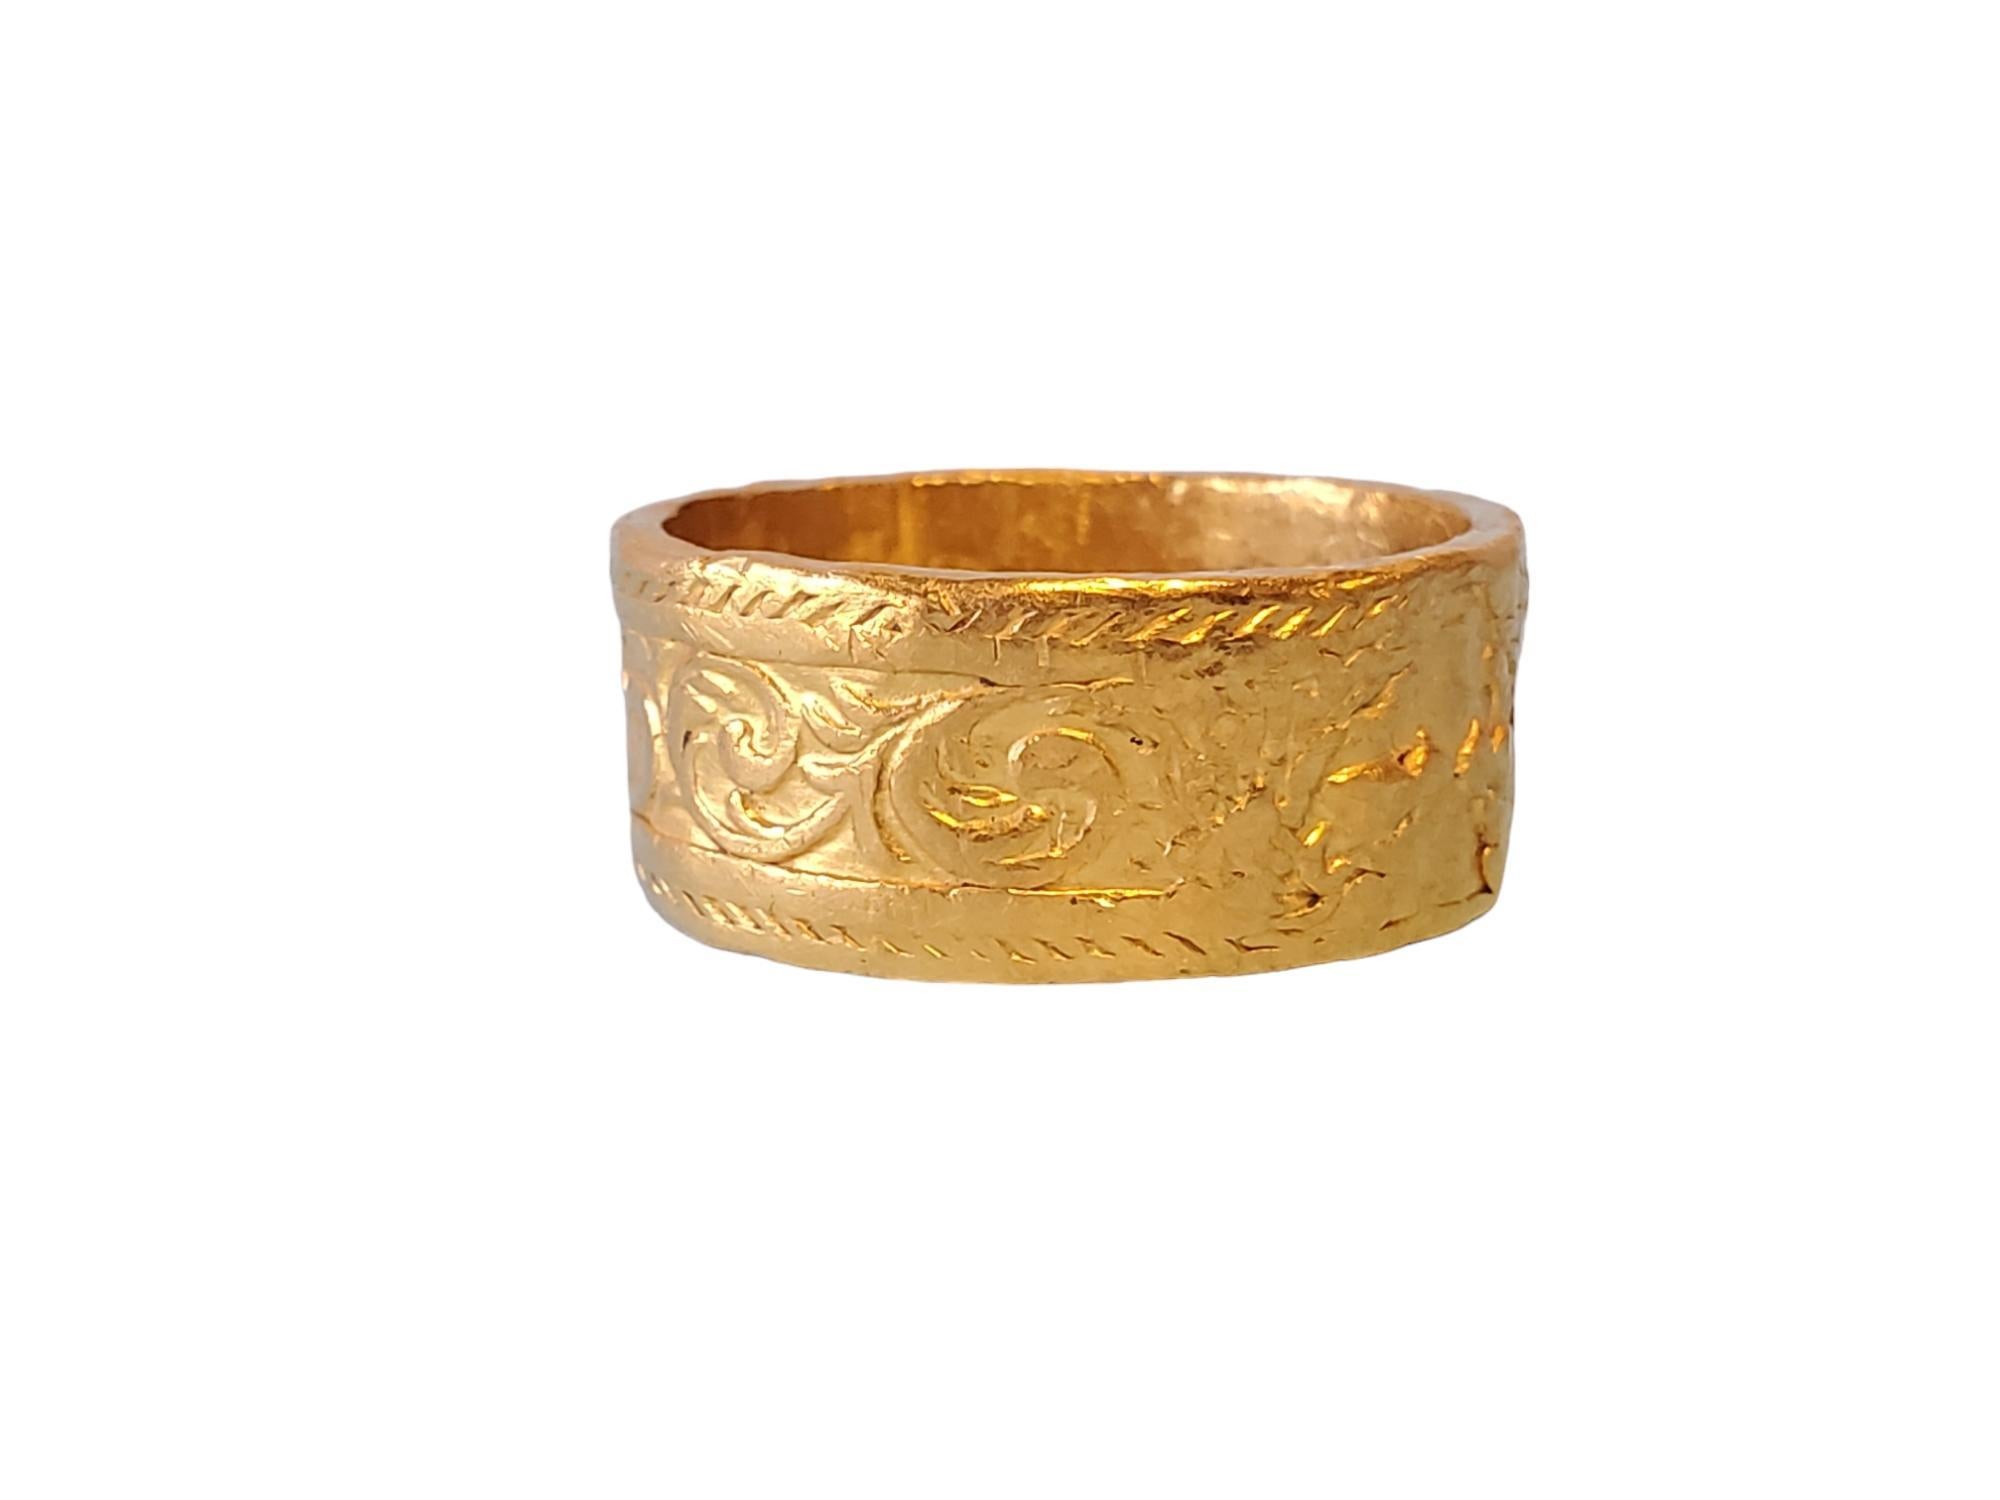 Mene 24kt Yellow Gold 10mm Wide Band

Listed is a signed fine designer 24kt gold band crafted by Mene. This designer specializes in 24kt gold jewelry and makes gorgeous rings and bands for clients world wide. This band is 10mm wide with beautiful